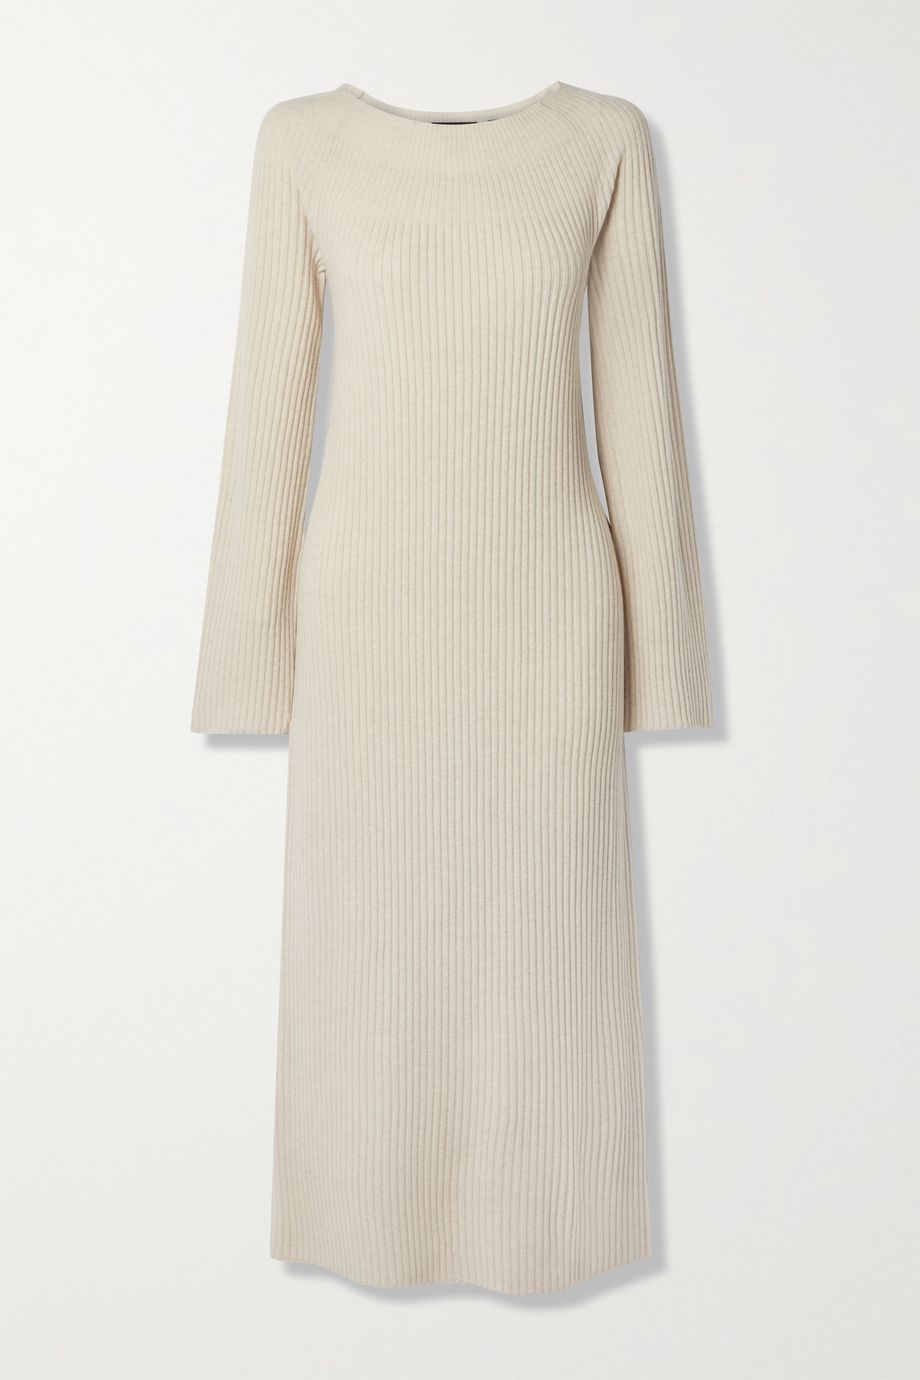 Theory + Ribbed Wool and Cashmere-blend Midi Dress